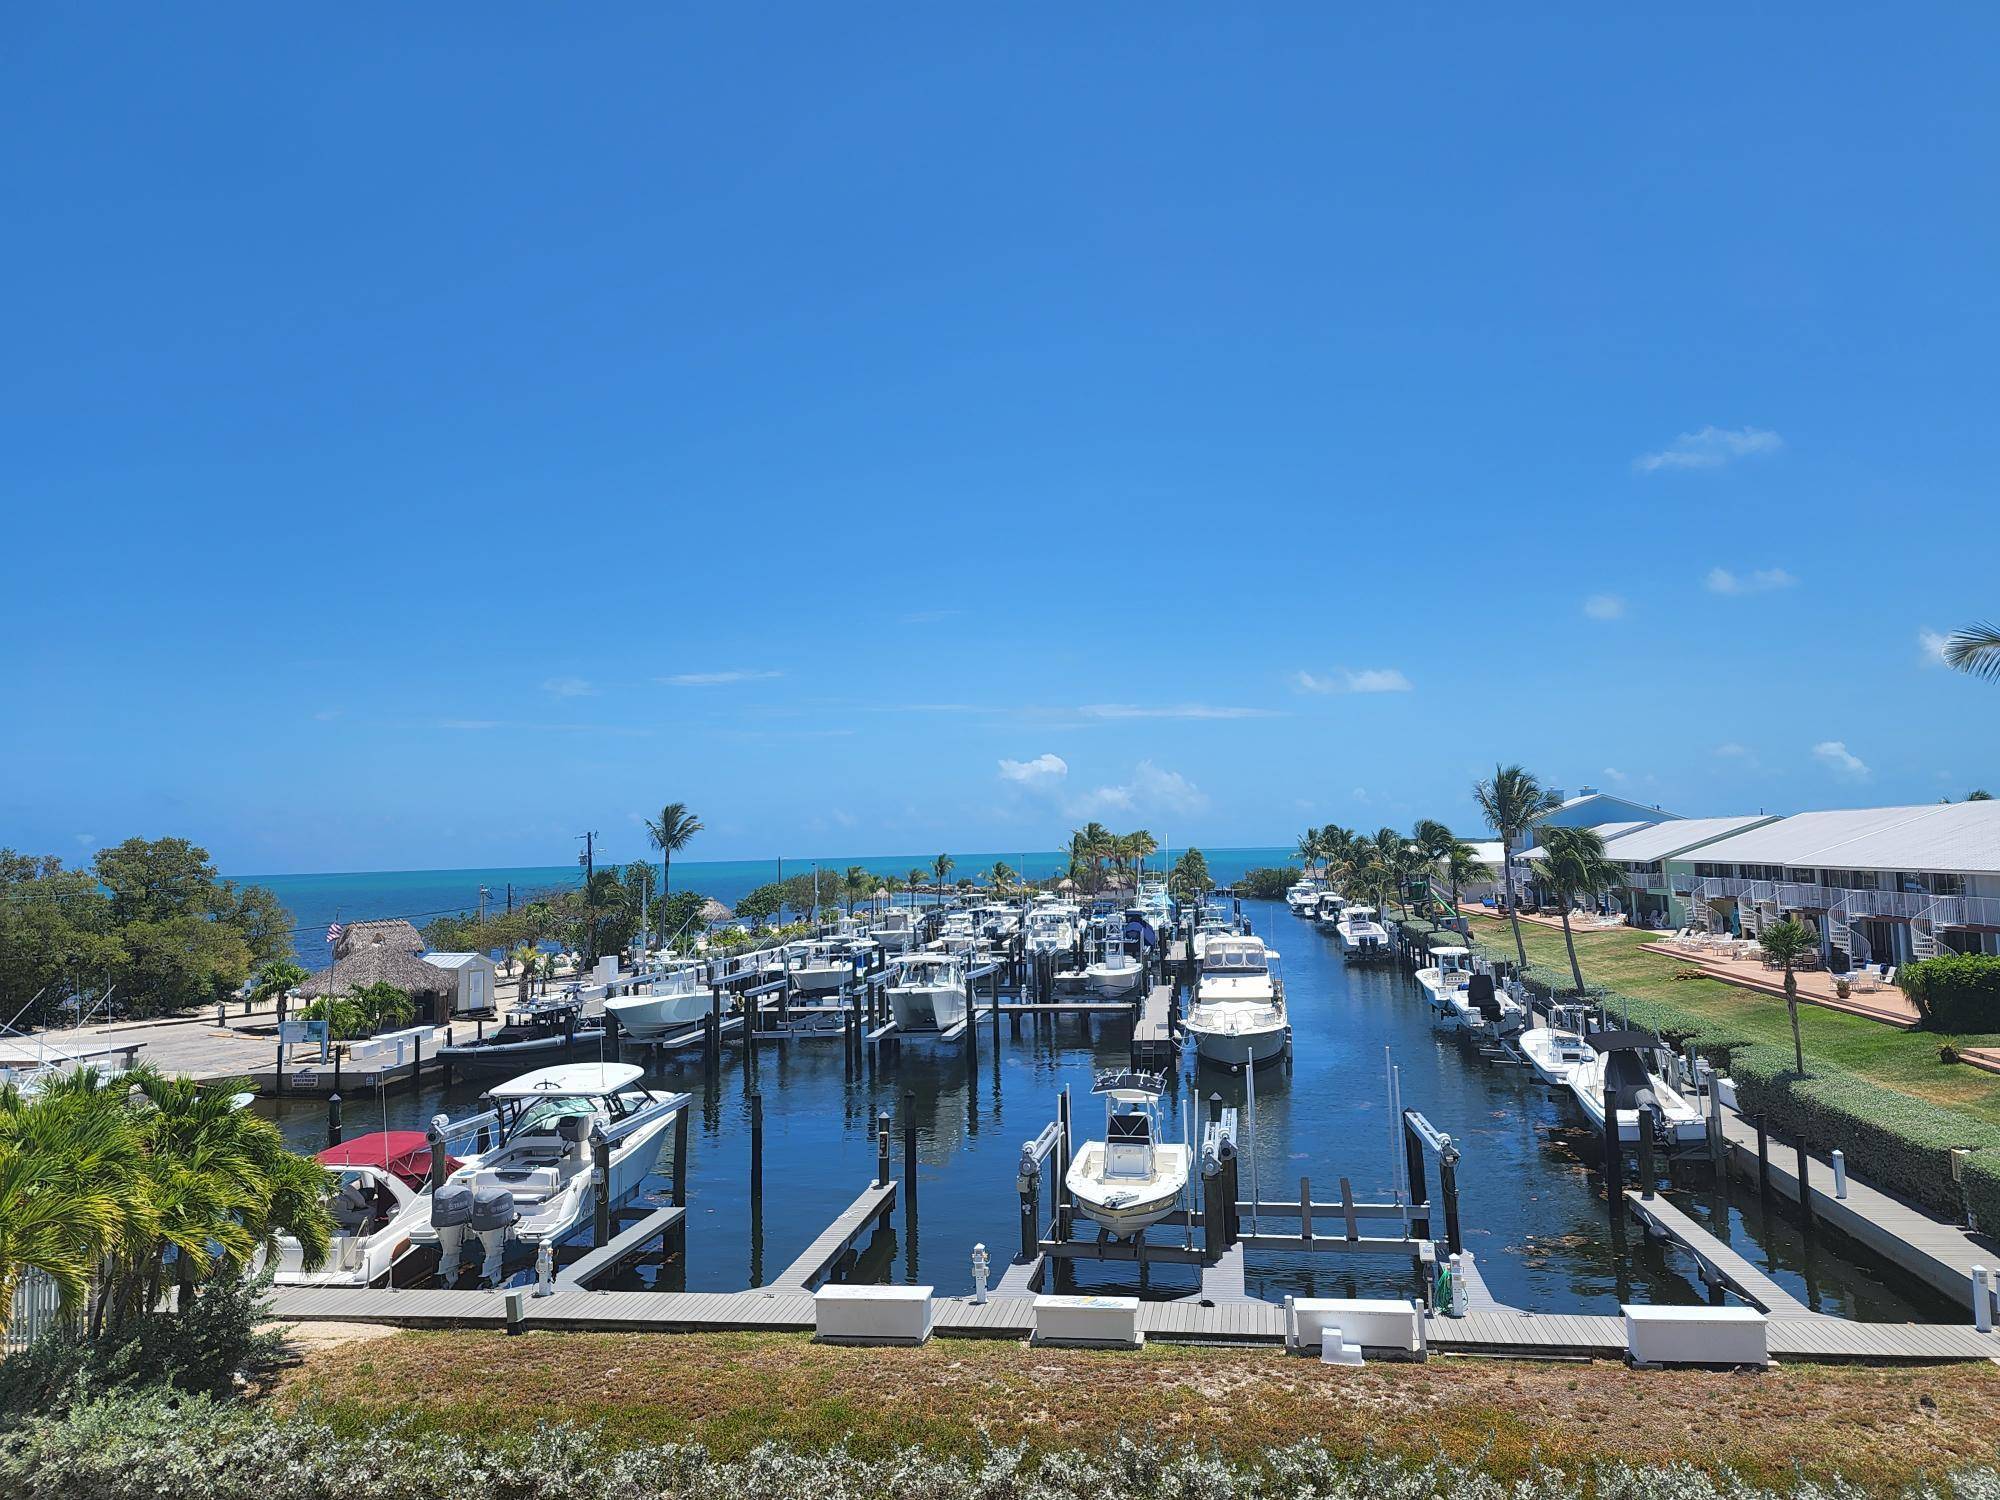 Immaculate Ocean and Marina view 2 bedrooms 2 full bath condo in sought after Kawama Community.